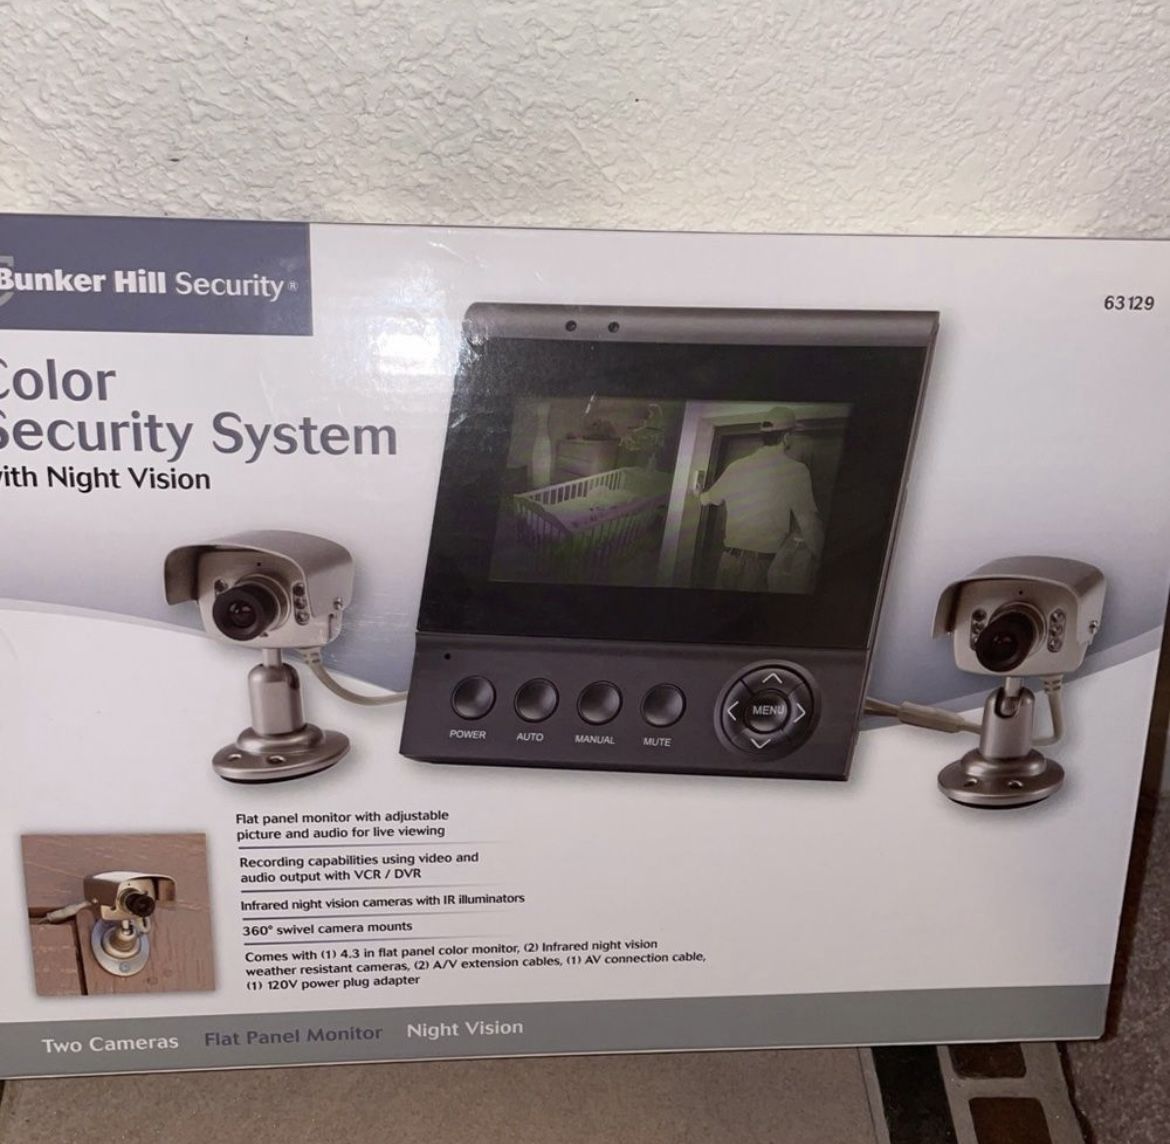 BUNKER HILL SECURITY SYSTEM WITH NIGHT VISION 2 CAMERAS PLUS FLAT SCREEN MONITOR